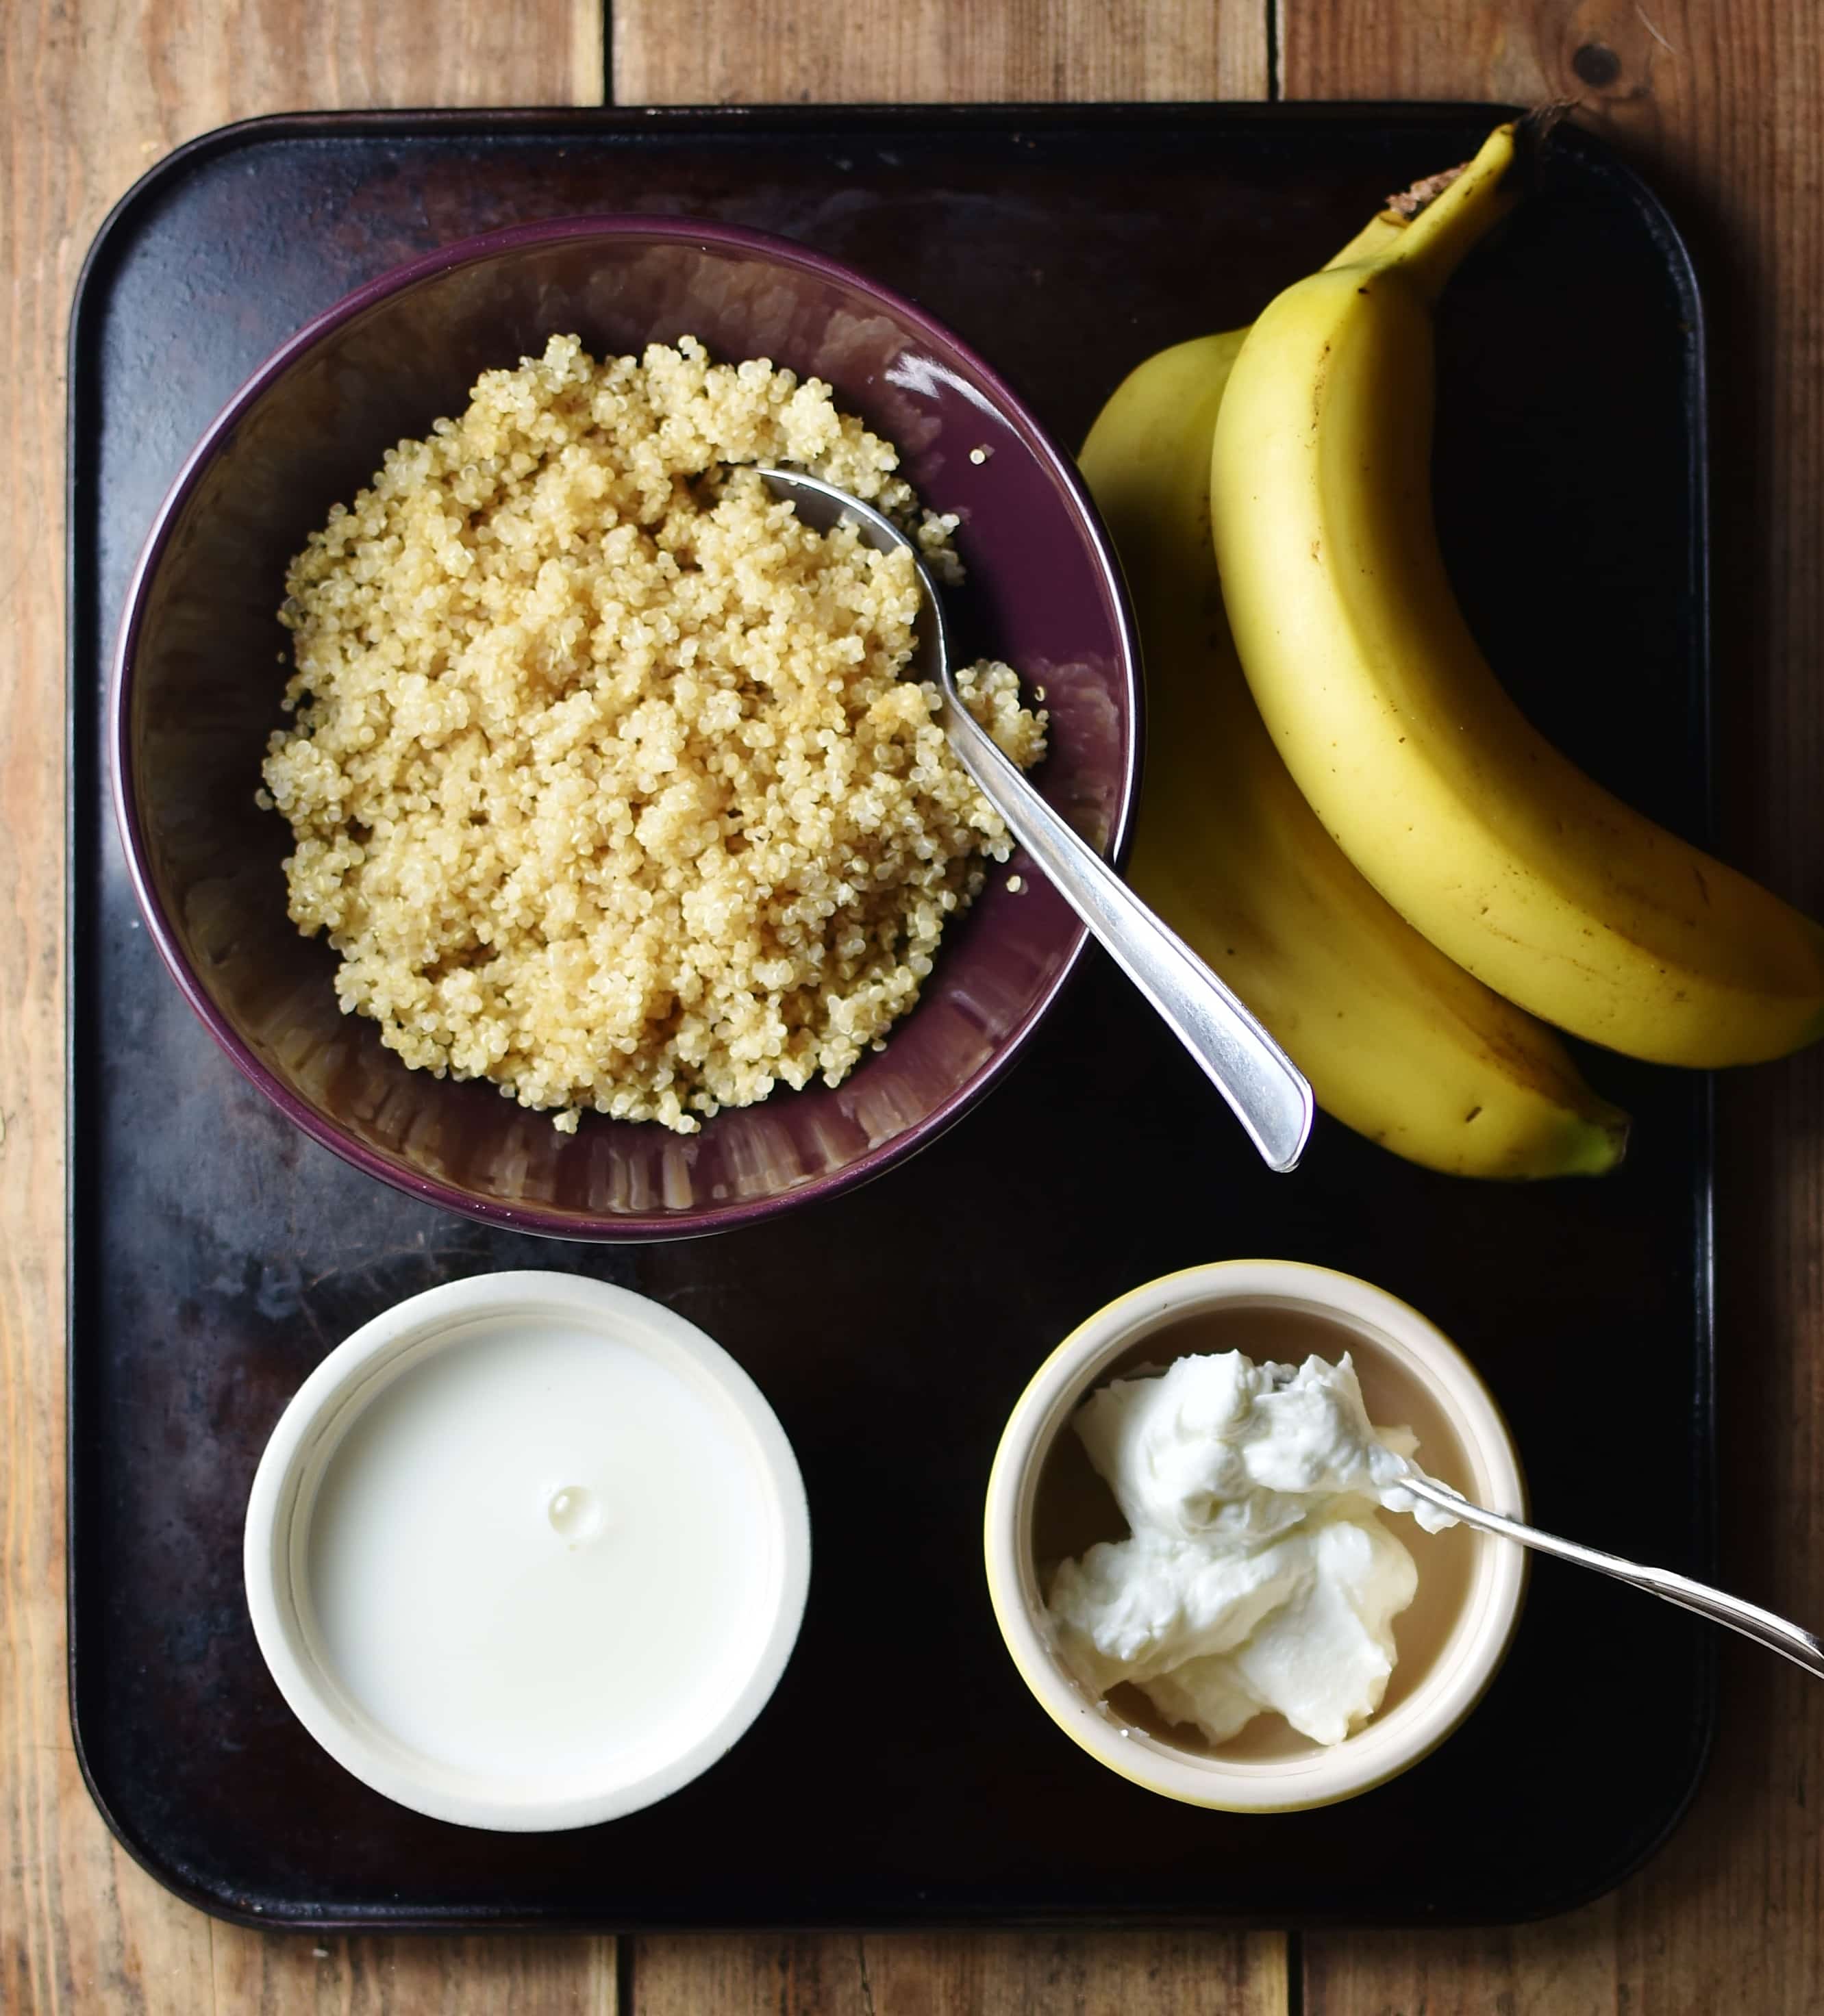 Cooked quinoa in purple bowl with spoon, 2 bananas, yogurt in small dish with spoon and milk in another dish.